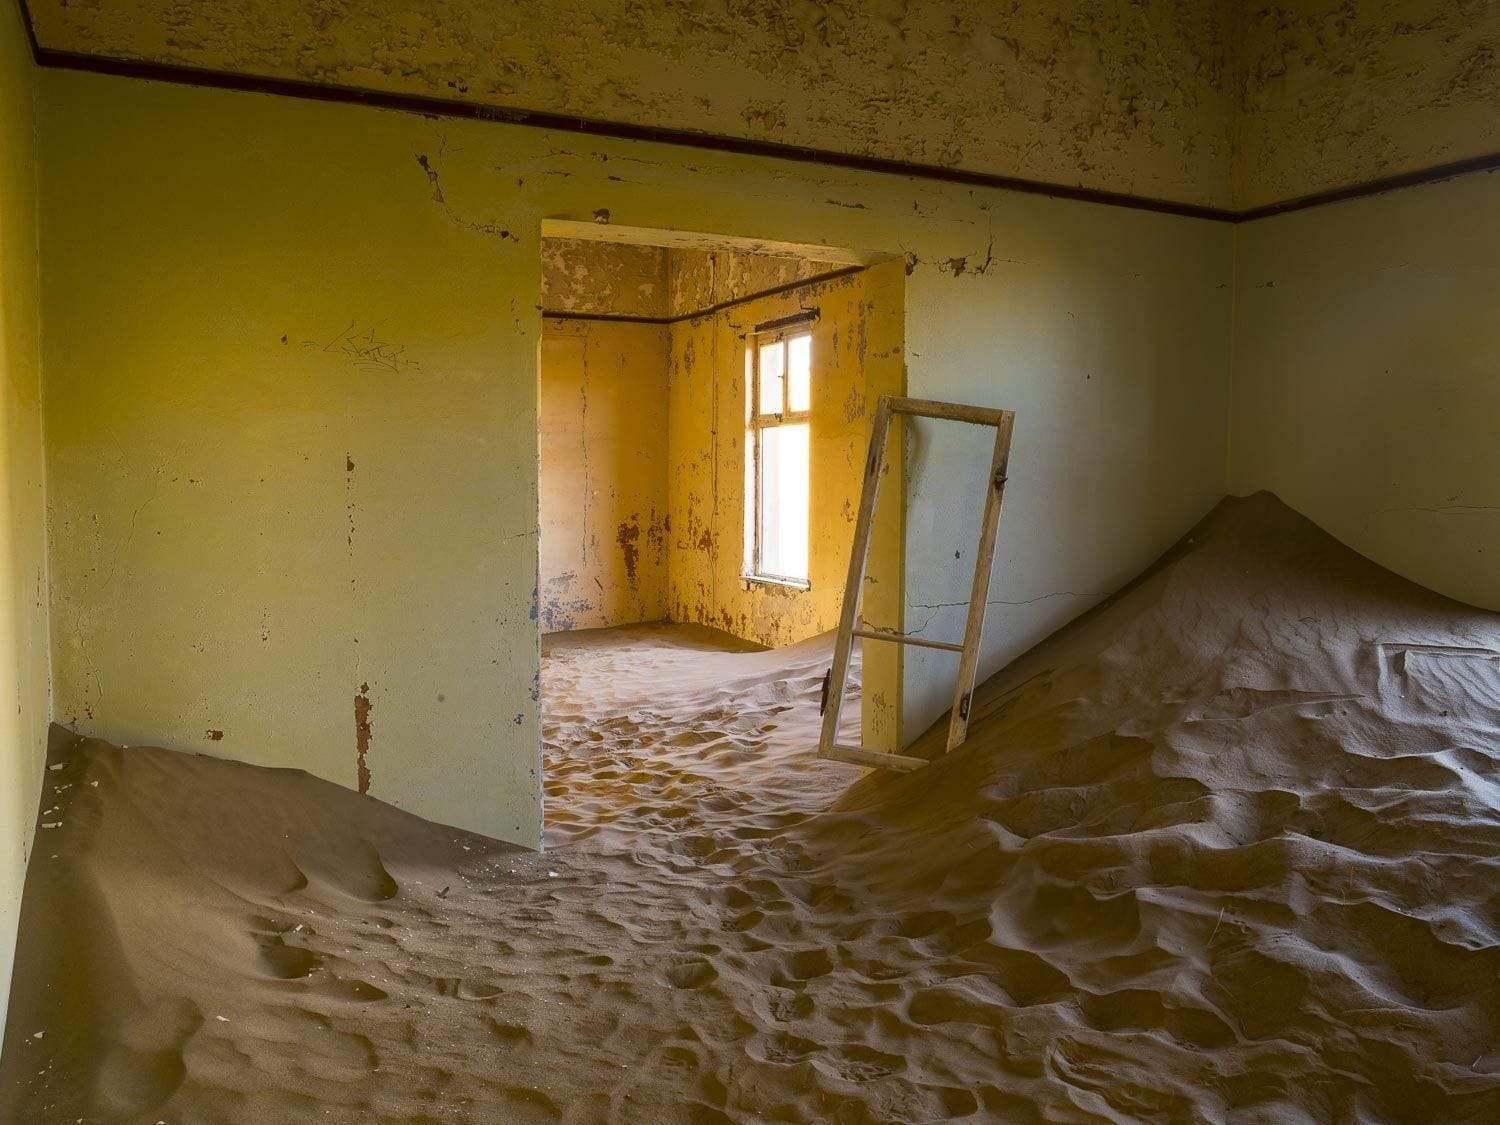 Making of a house with a mound of sand inside the room, Kolmanskop #11